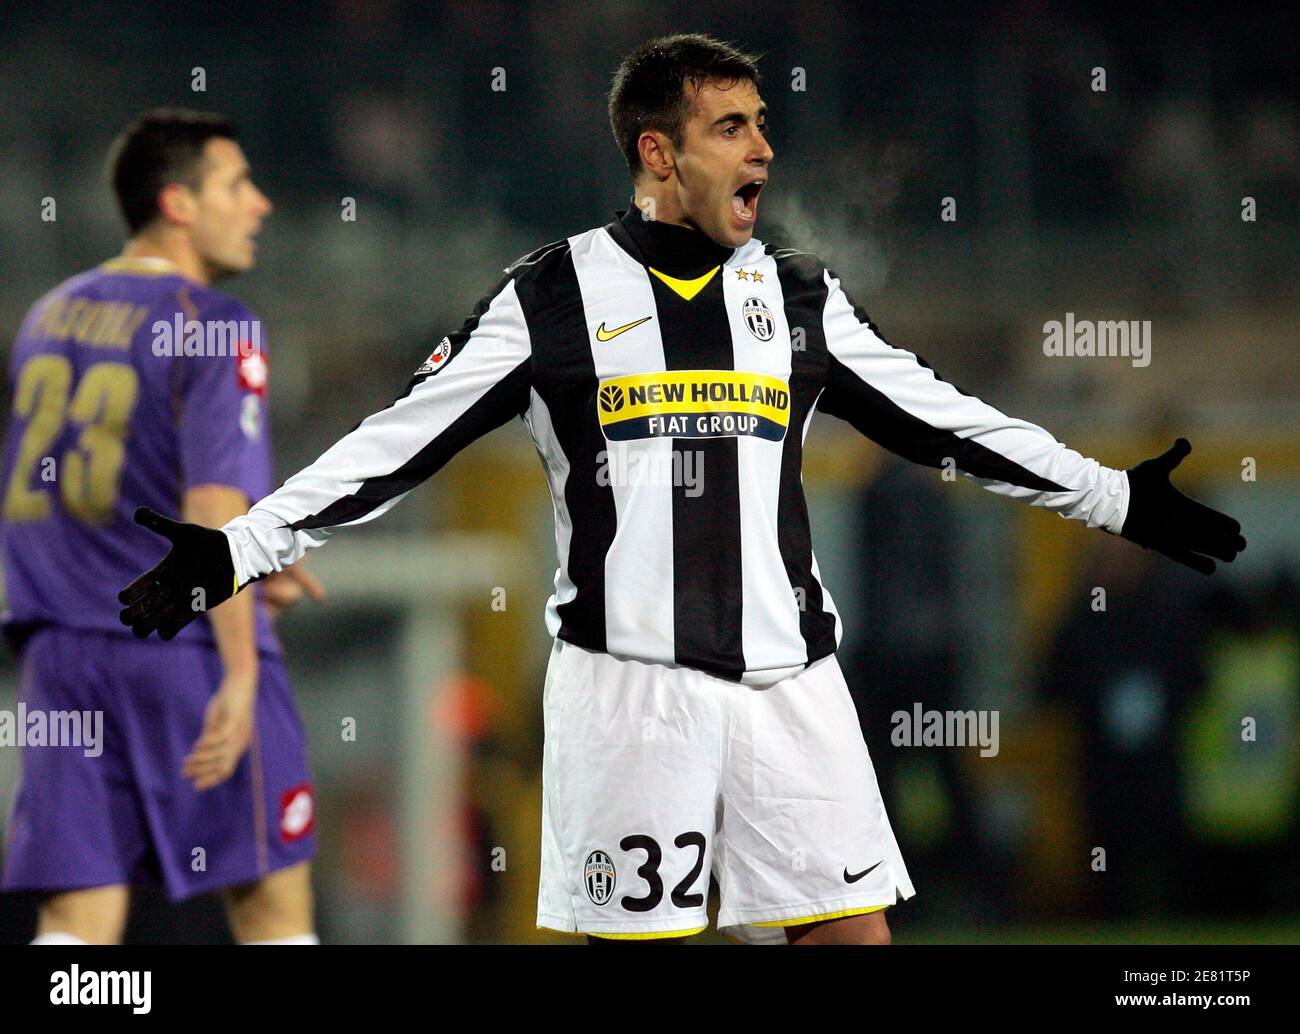 Juventus's Marco Marchionni reacts during their Italian Serie A soccer match against Fiorentina at the Olympic stadium in Turin January 24, 2009. REUTERS/Alessandro Garofalo   (ITALY) Stock Photo